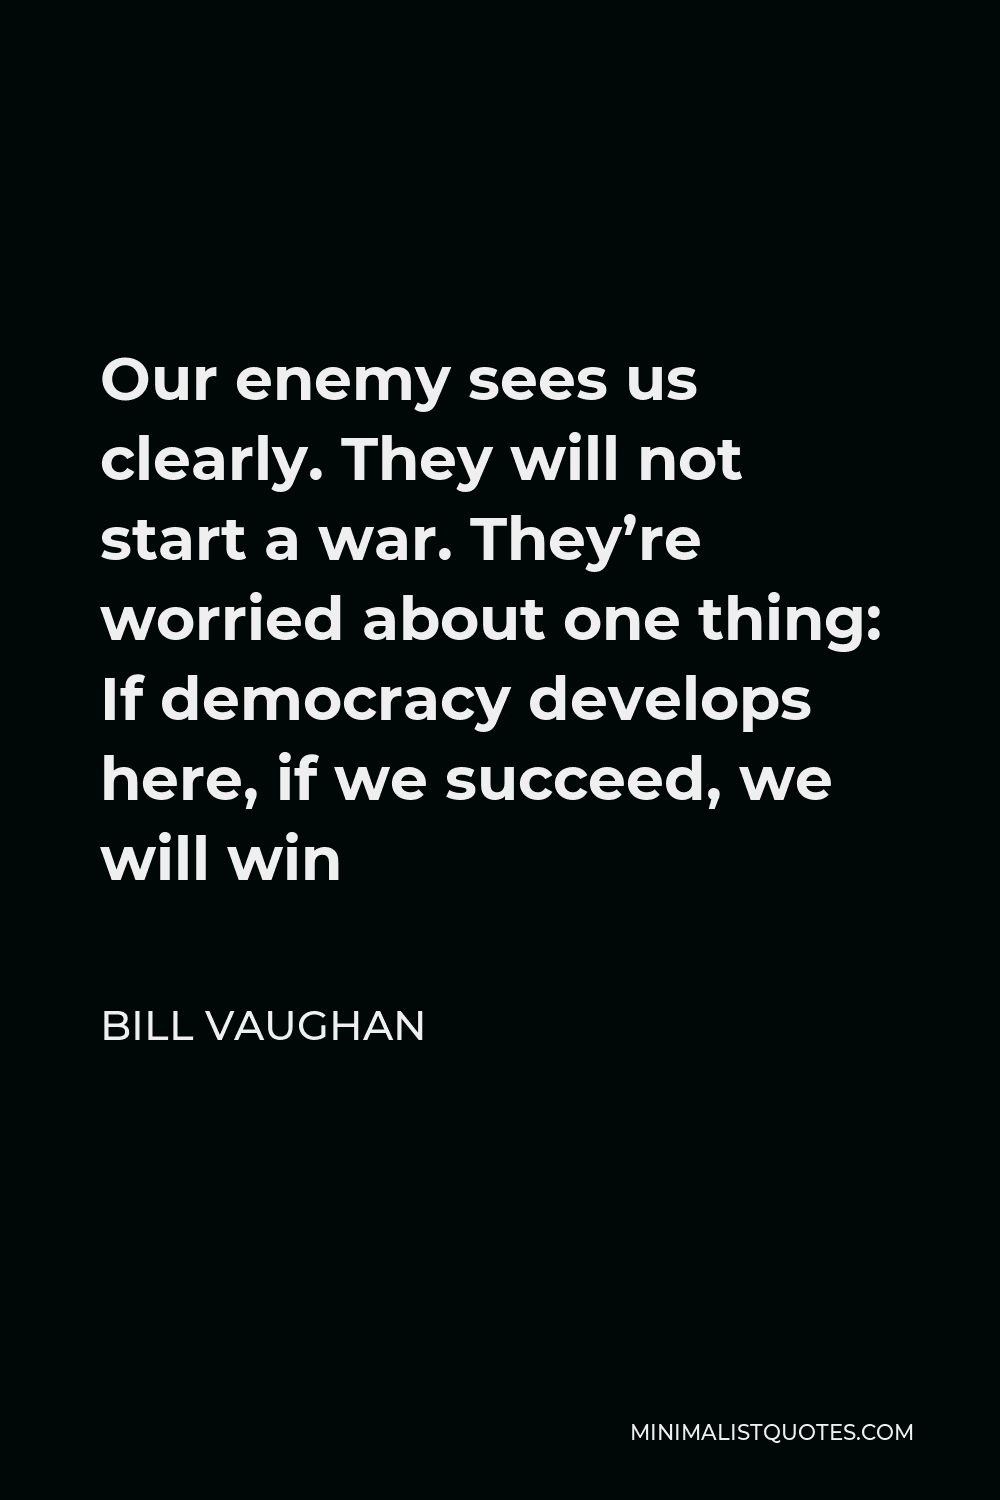 Bill Vaughan Quote - Our enemy sees us clearly. They will not start a war. They’re worried about one thing: If democracy develops here, if we succeed, we will win